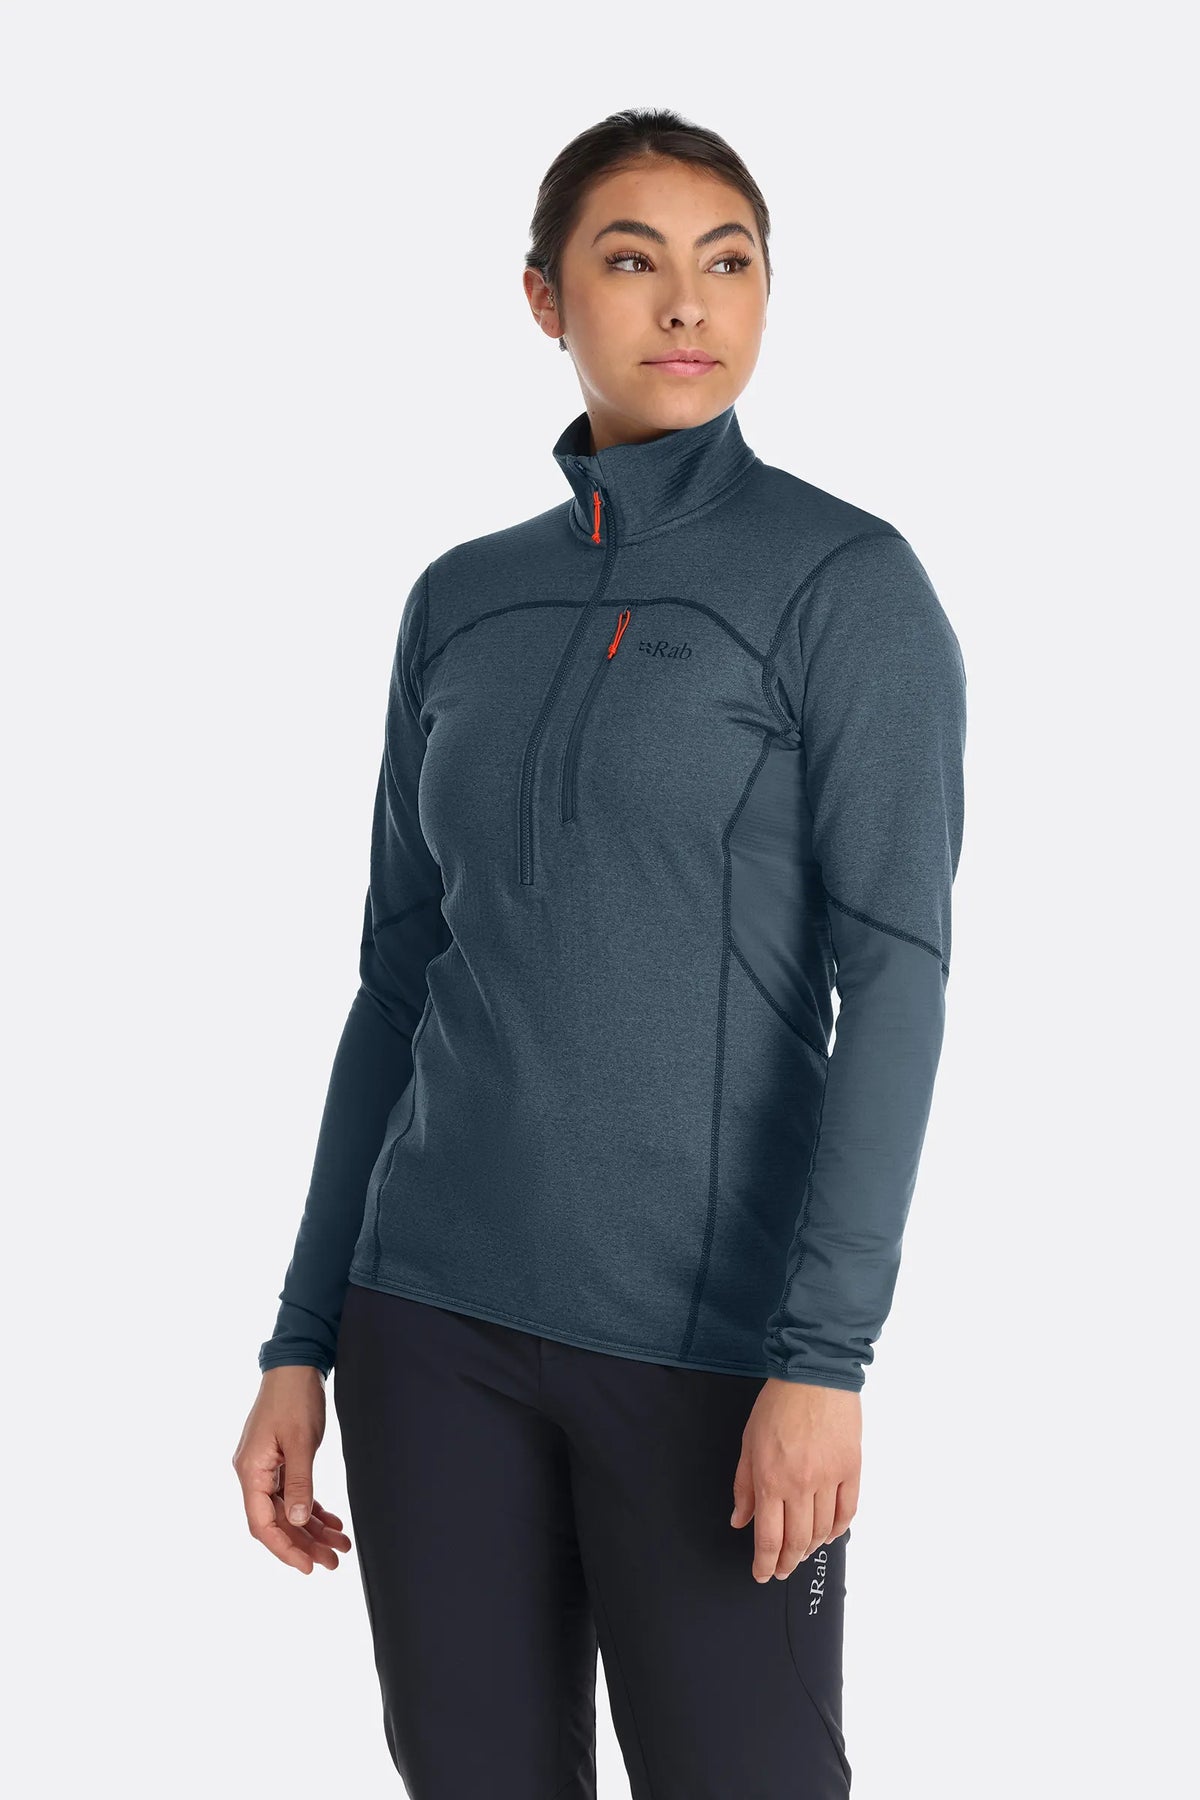 Rab Woman&#39;s Ascendor Pull On